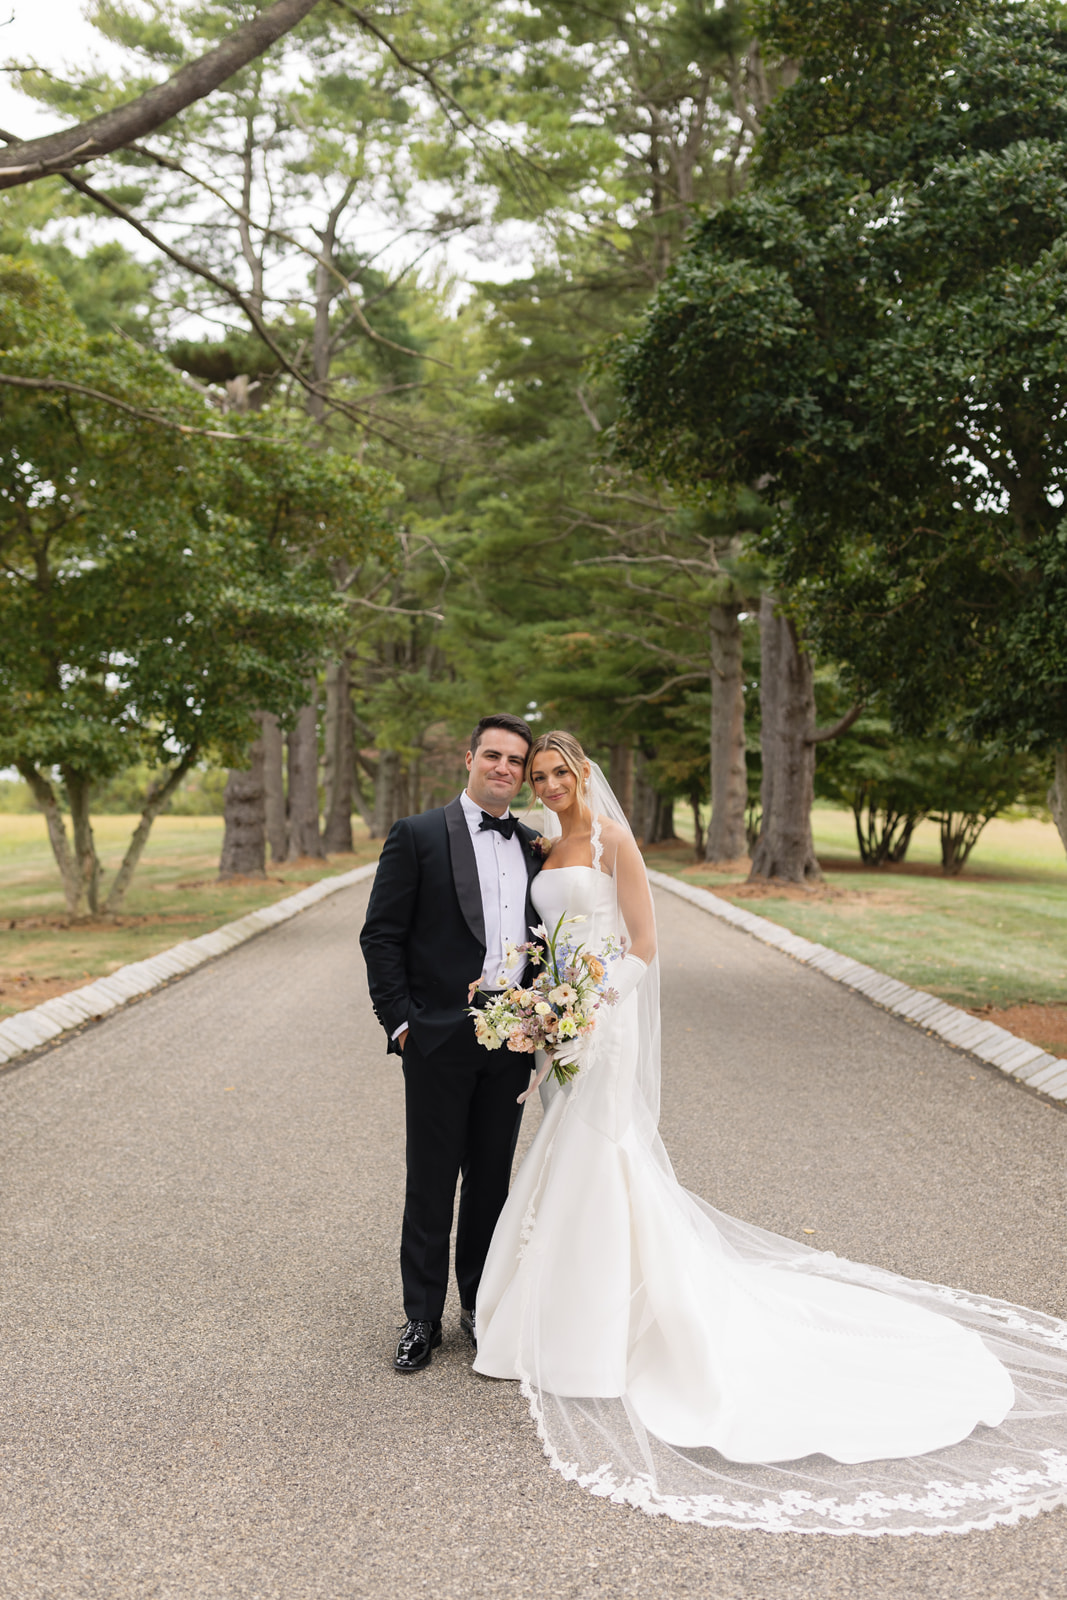 A Romantic Allentown New Jersey wedding at The Ashford Estate. Digital and film photography by Madison Katlin Photo